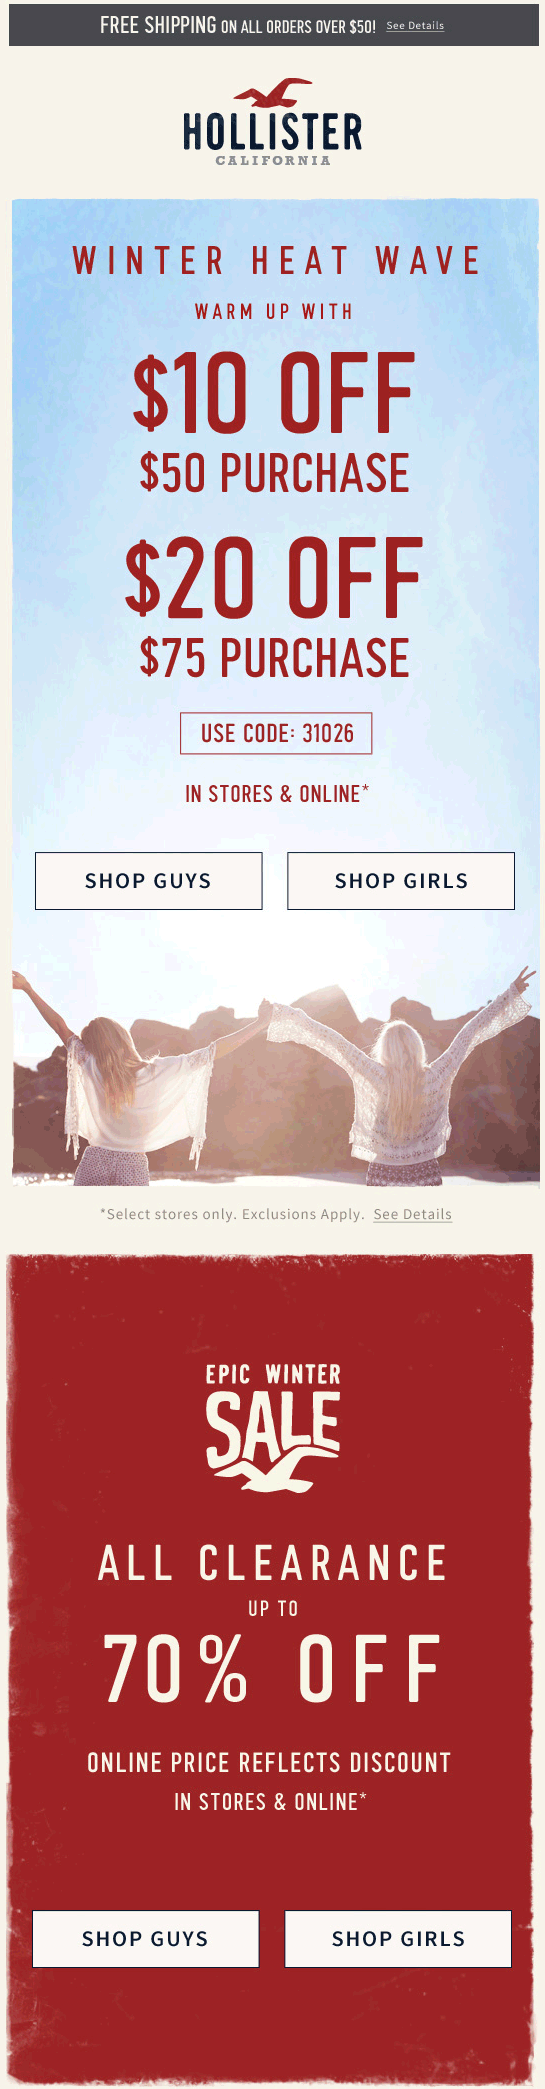 hollister coupons january 2019